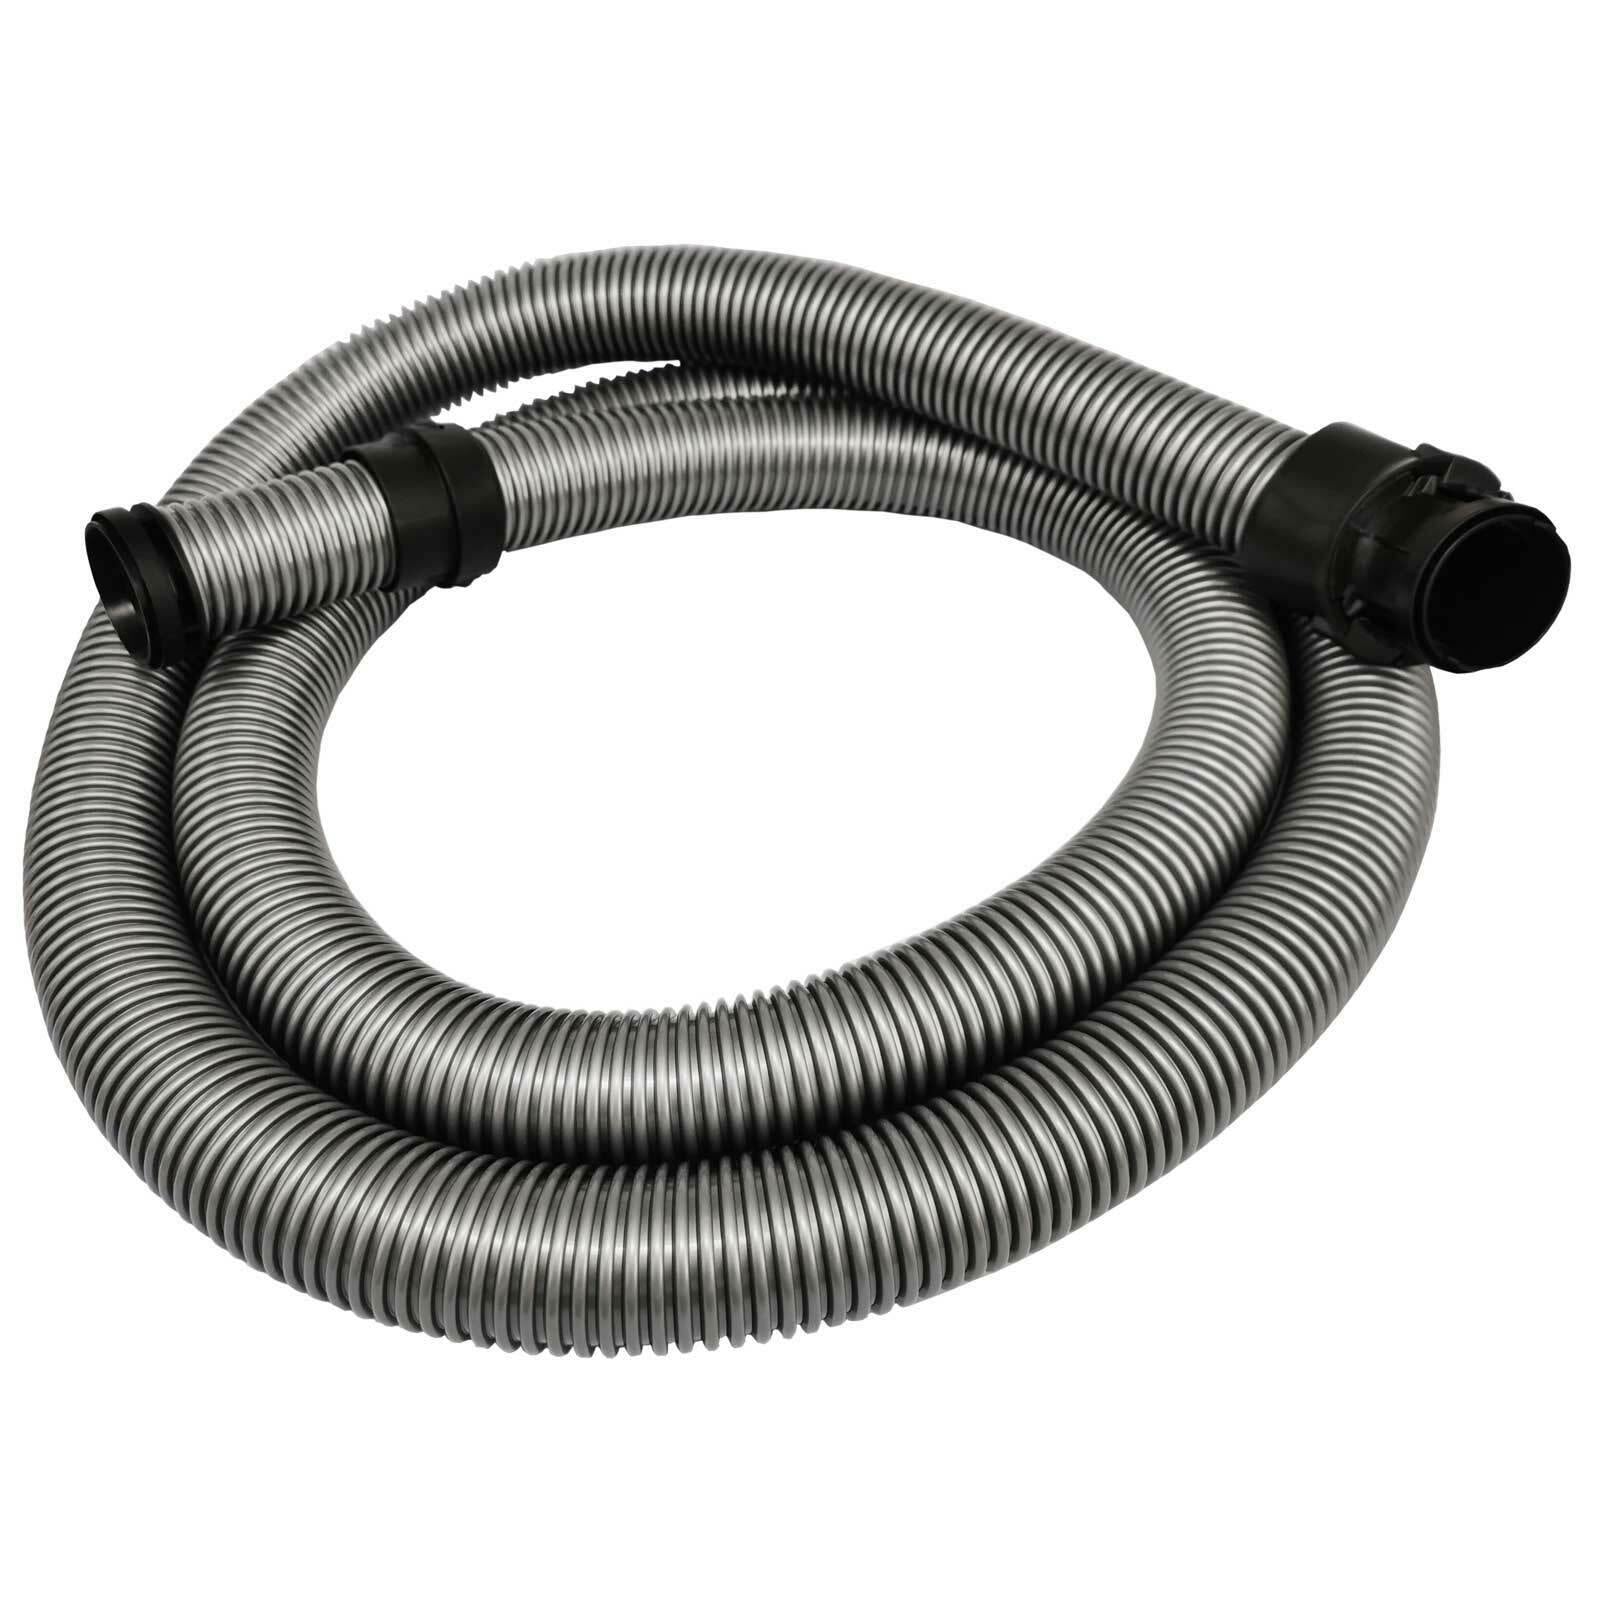 Suction Tube Hose 2.5M For Miele S8310 S8320 S8330 S8340 S8390 S8590 Sparesbarn